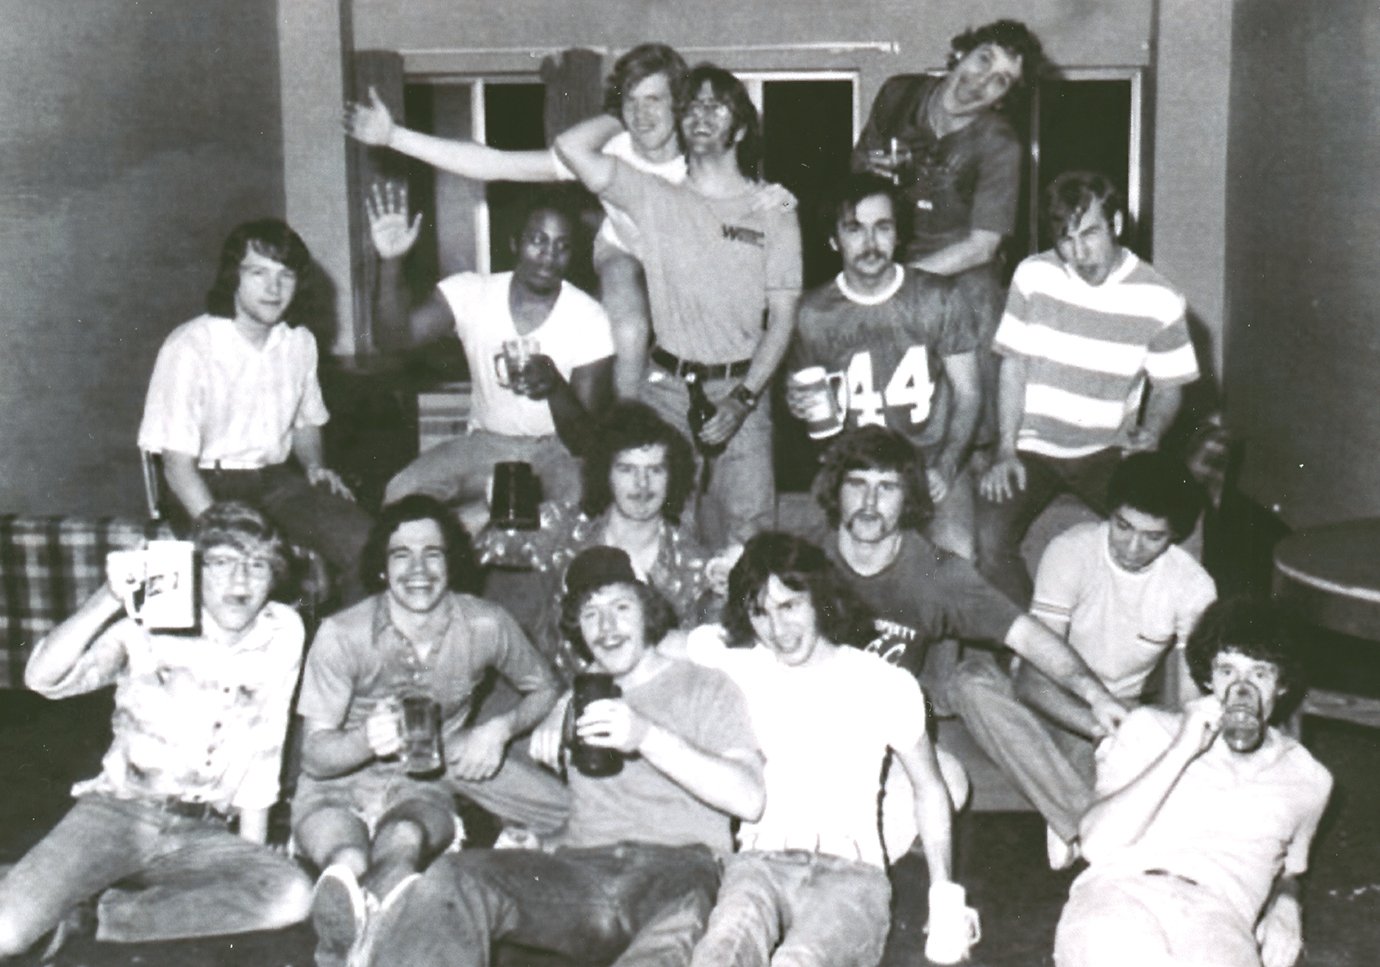 black and white photo of group of college friends from the 1970s sit and stand in a group smiling for the camera